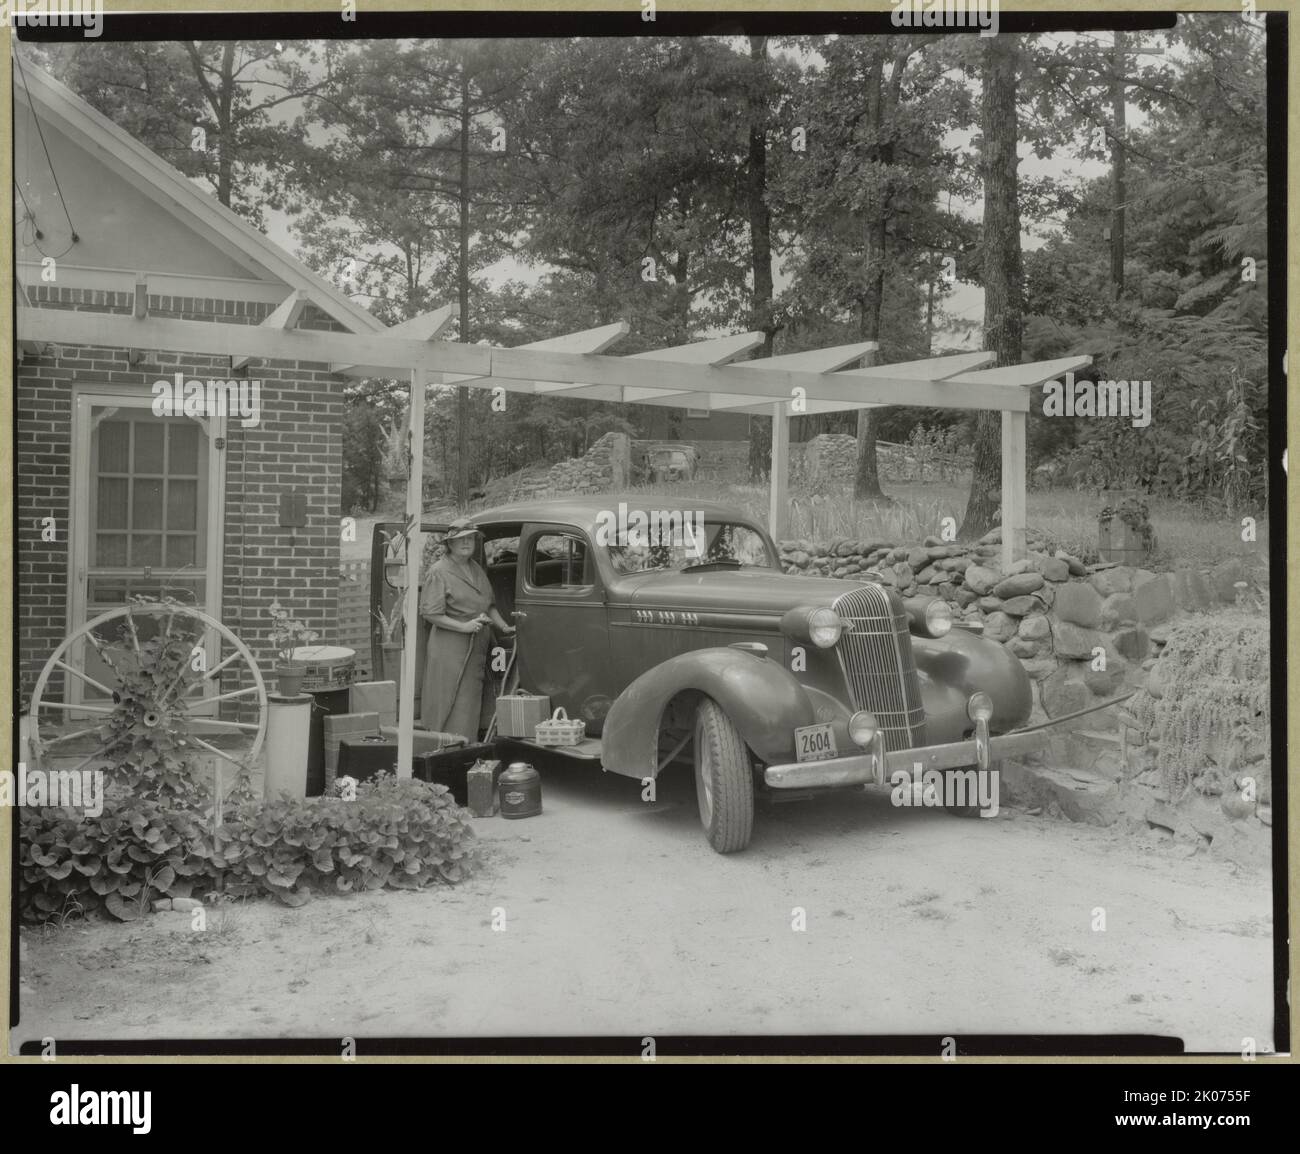 Frances B. Johnston at the Wheel Inn, Morganton, N.C., 1938. The photographer Frances B. Johnston standing with her luggage by the car she rode in to document historic buildings for the Carnegie Survey of the Architecture of the South. Stock Photo